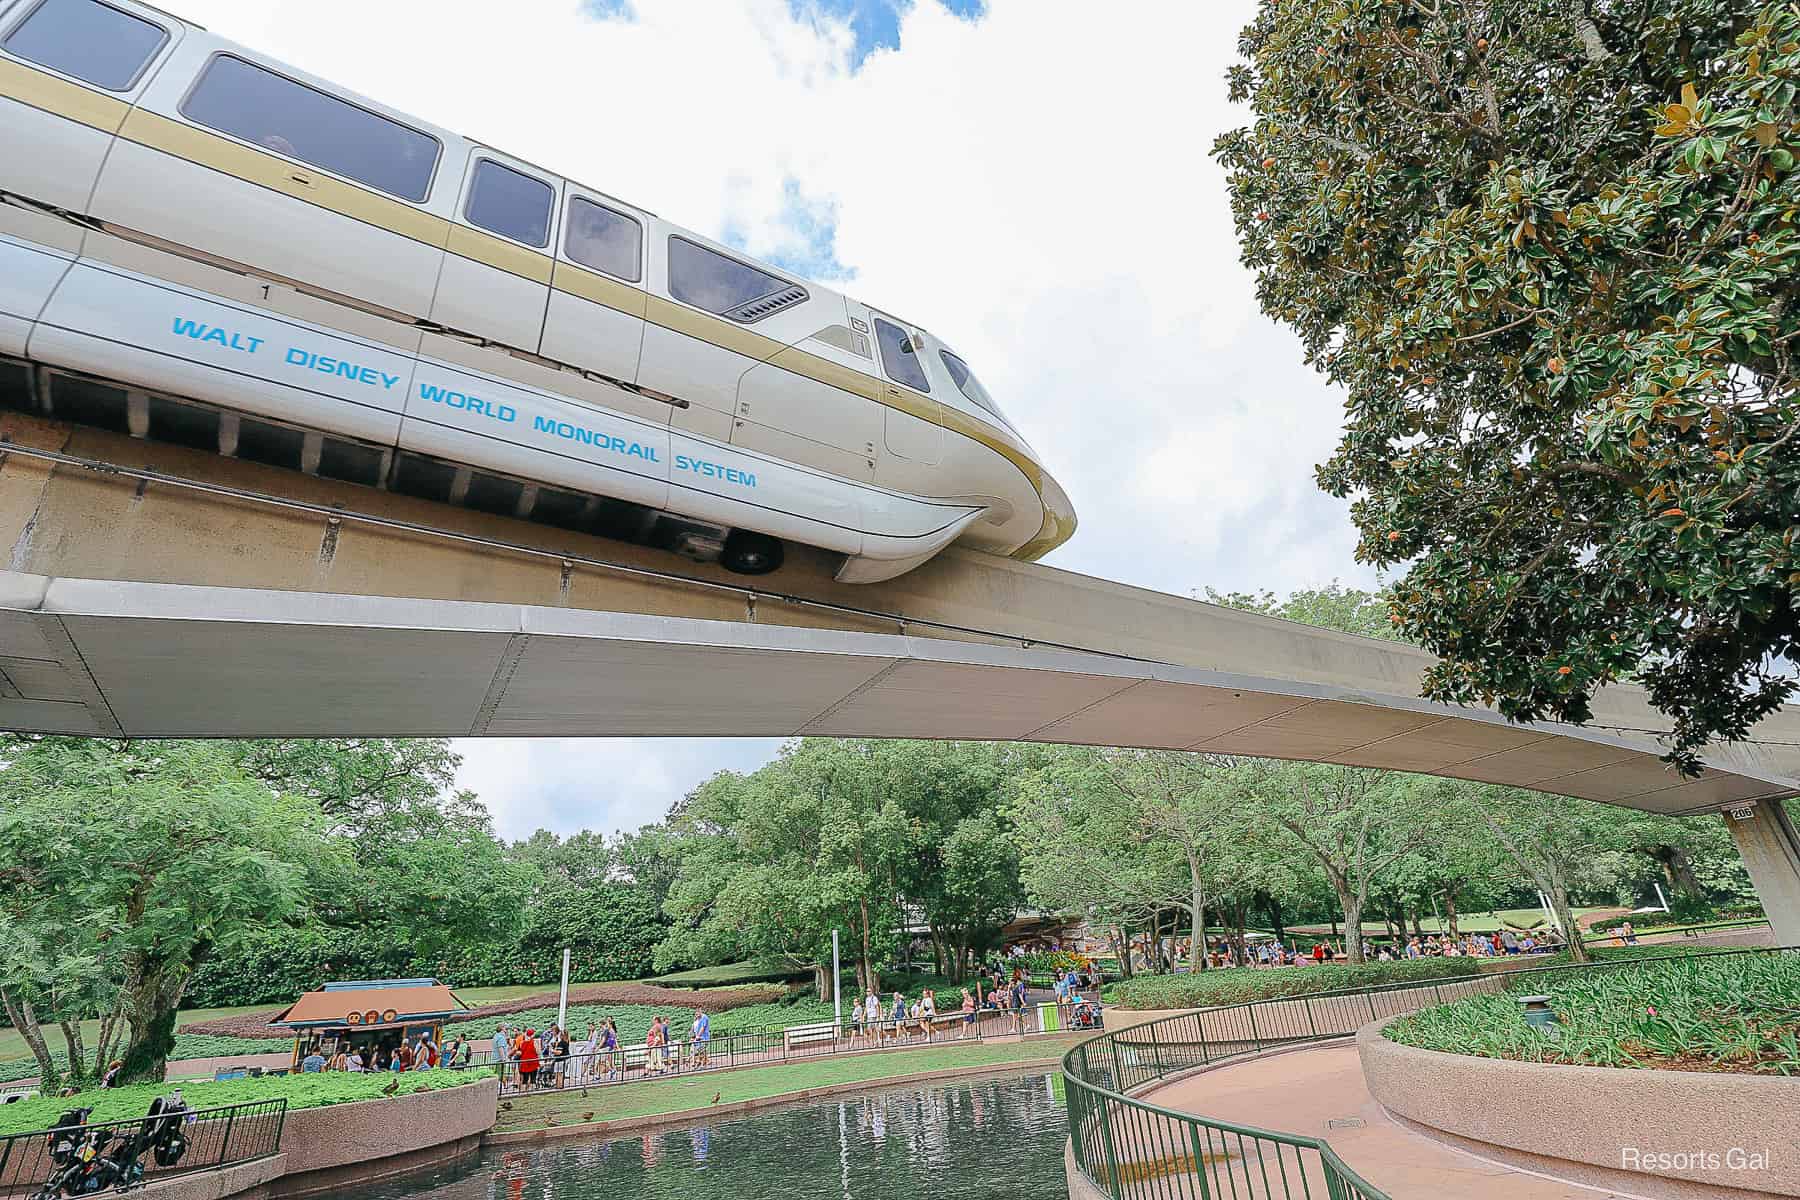 Monorail Gold as it travels through the park.